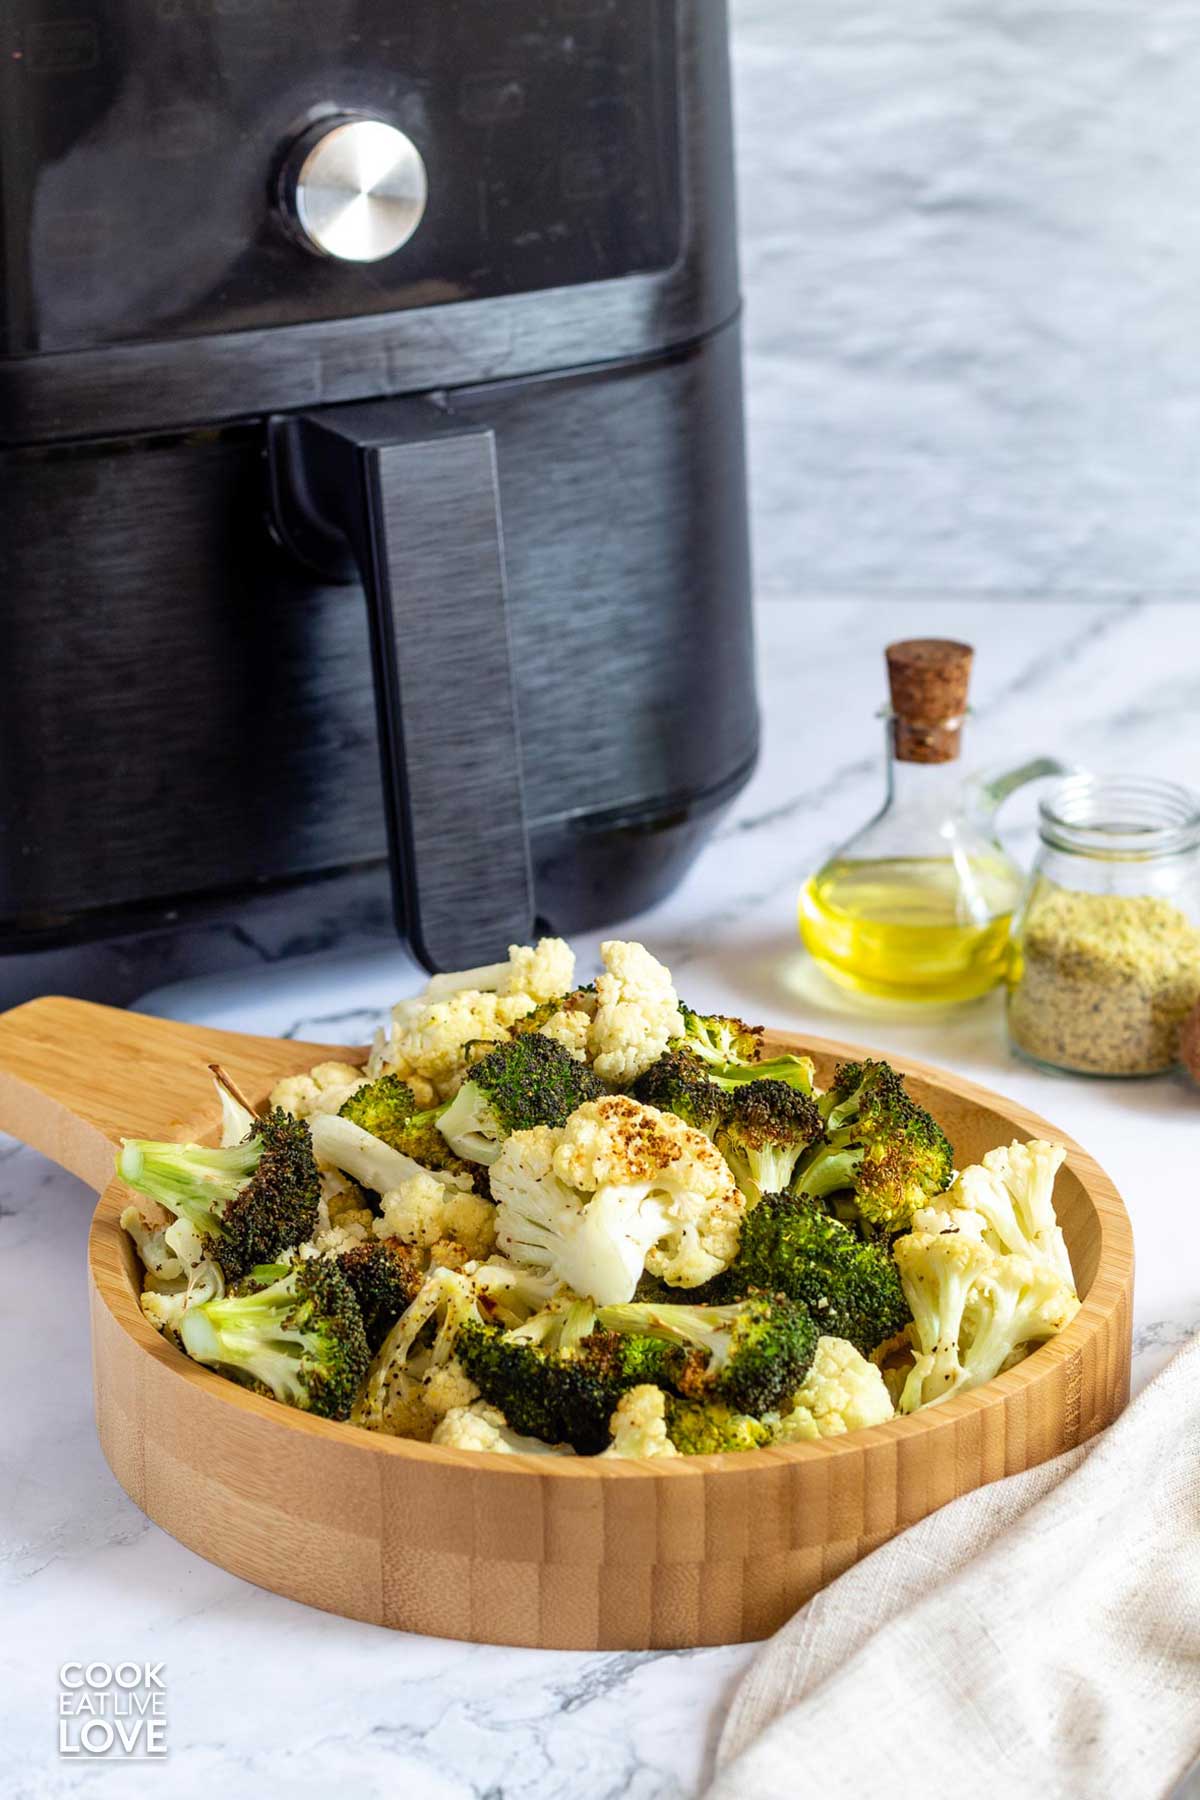 Broccoli and cauliflower served up in a wooden bowl in front of an air fryer.